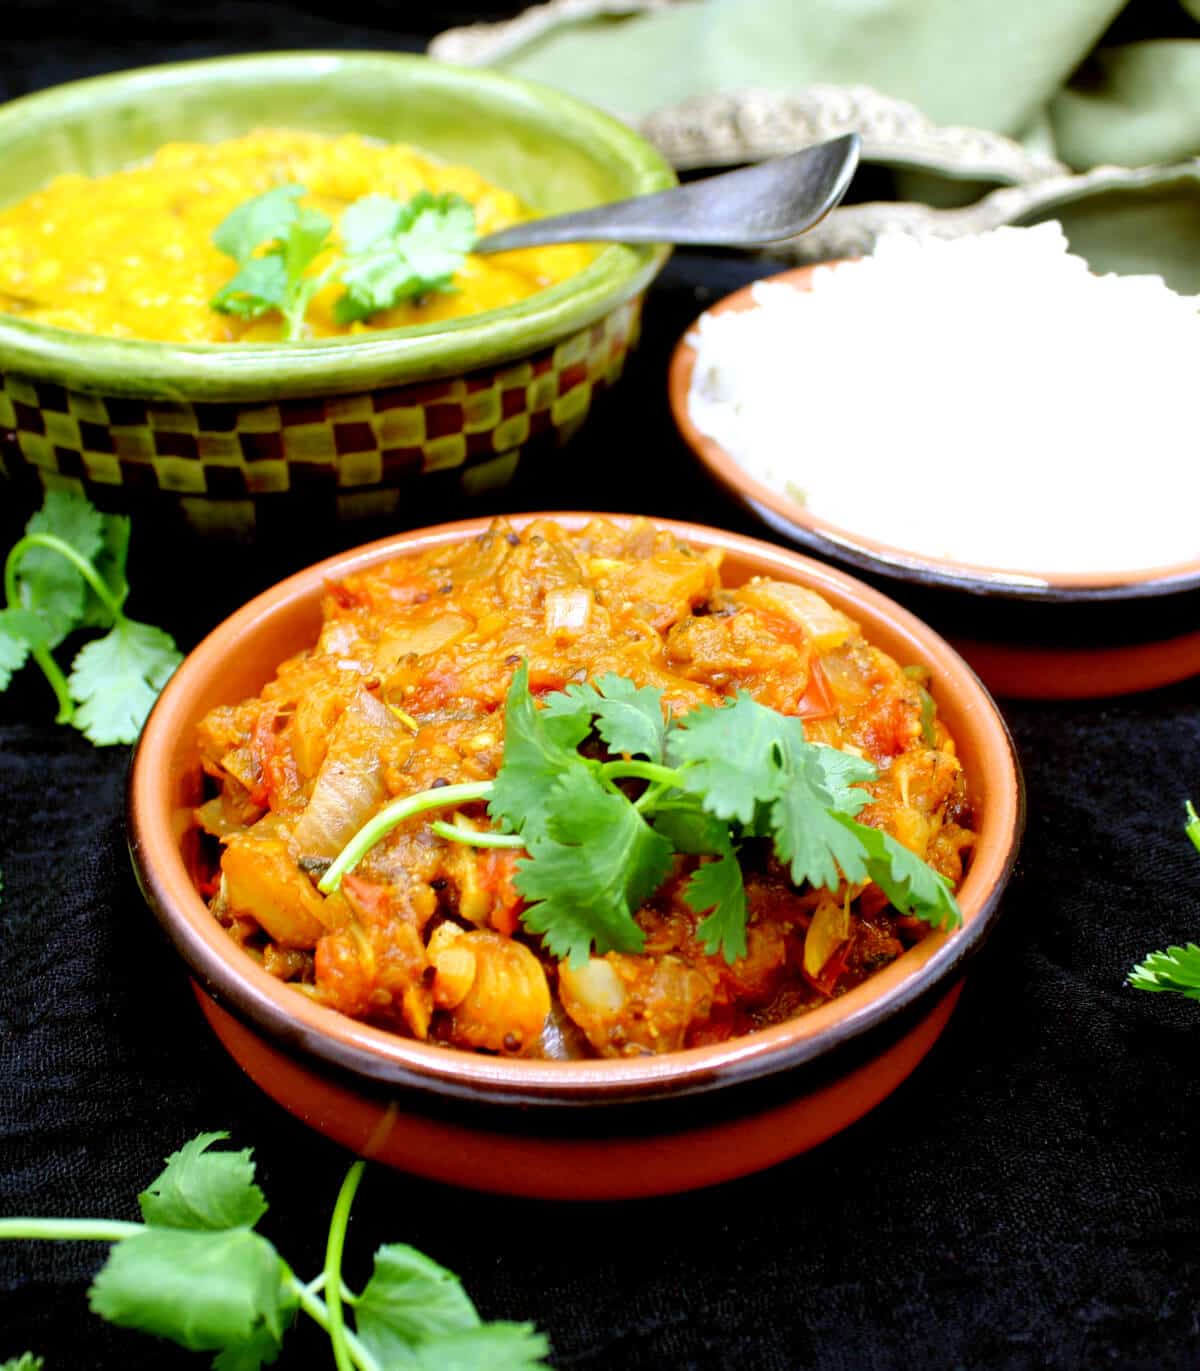 Baingan Bharta garnished with cilantro in a clay bowl. Next to it are tomato dal and rice with a spoon.